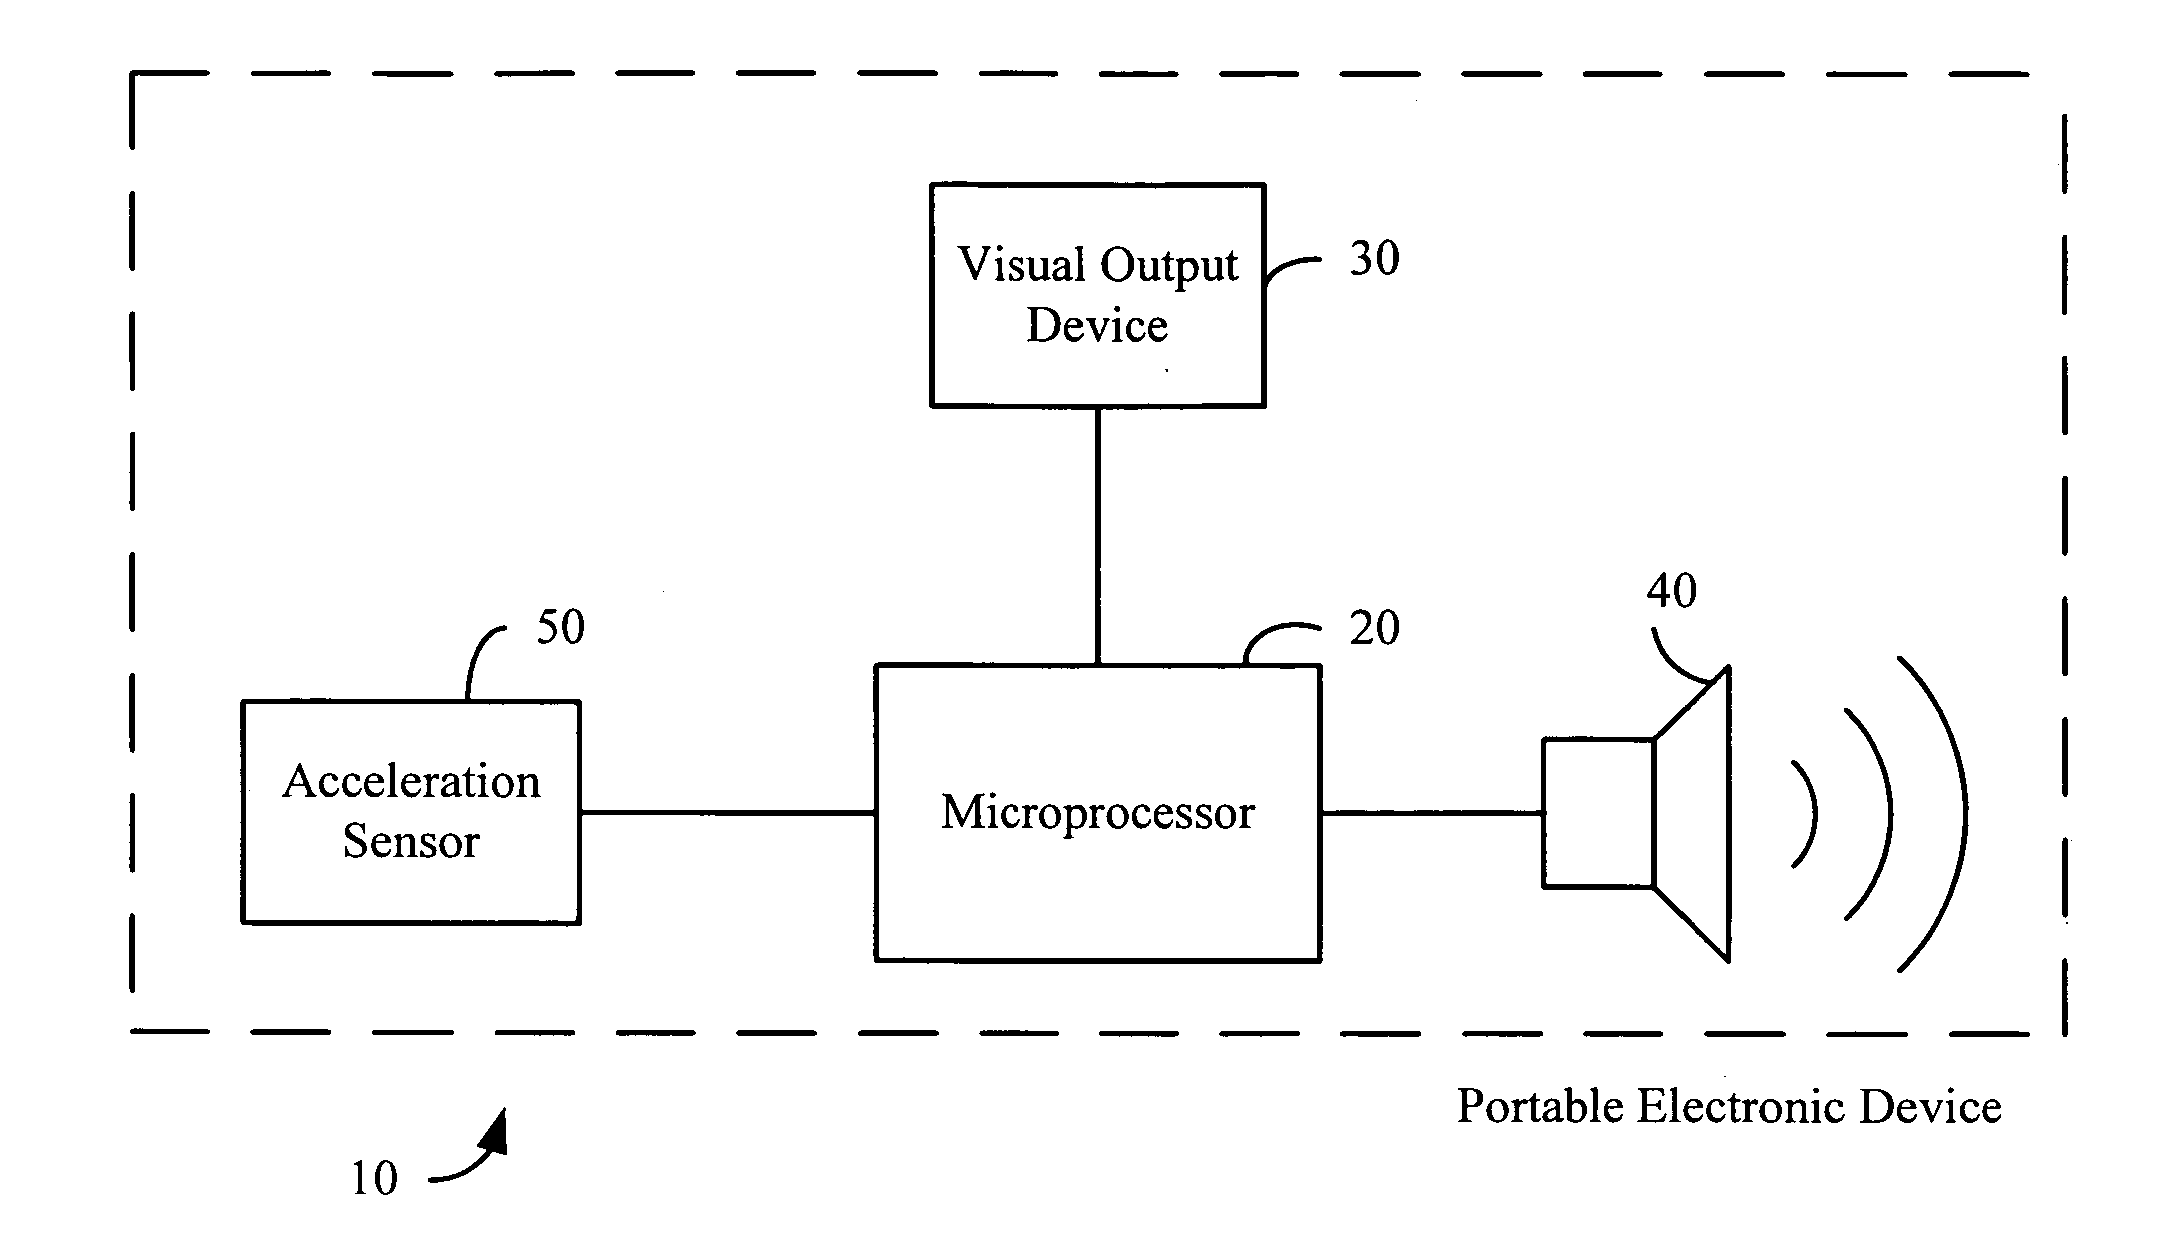 Acceleration-based theft detection system for portable electronic devices